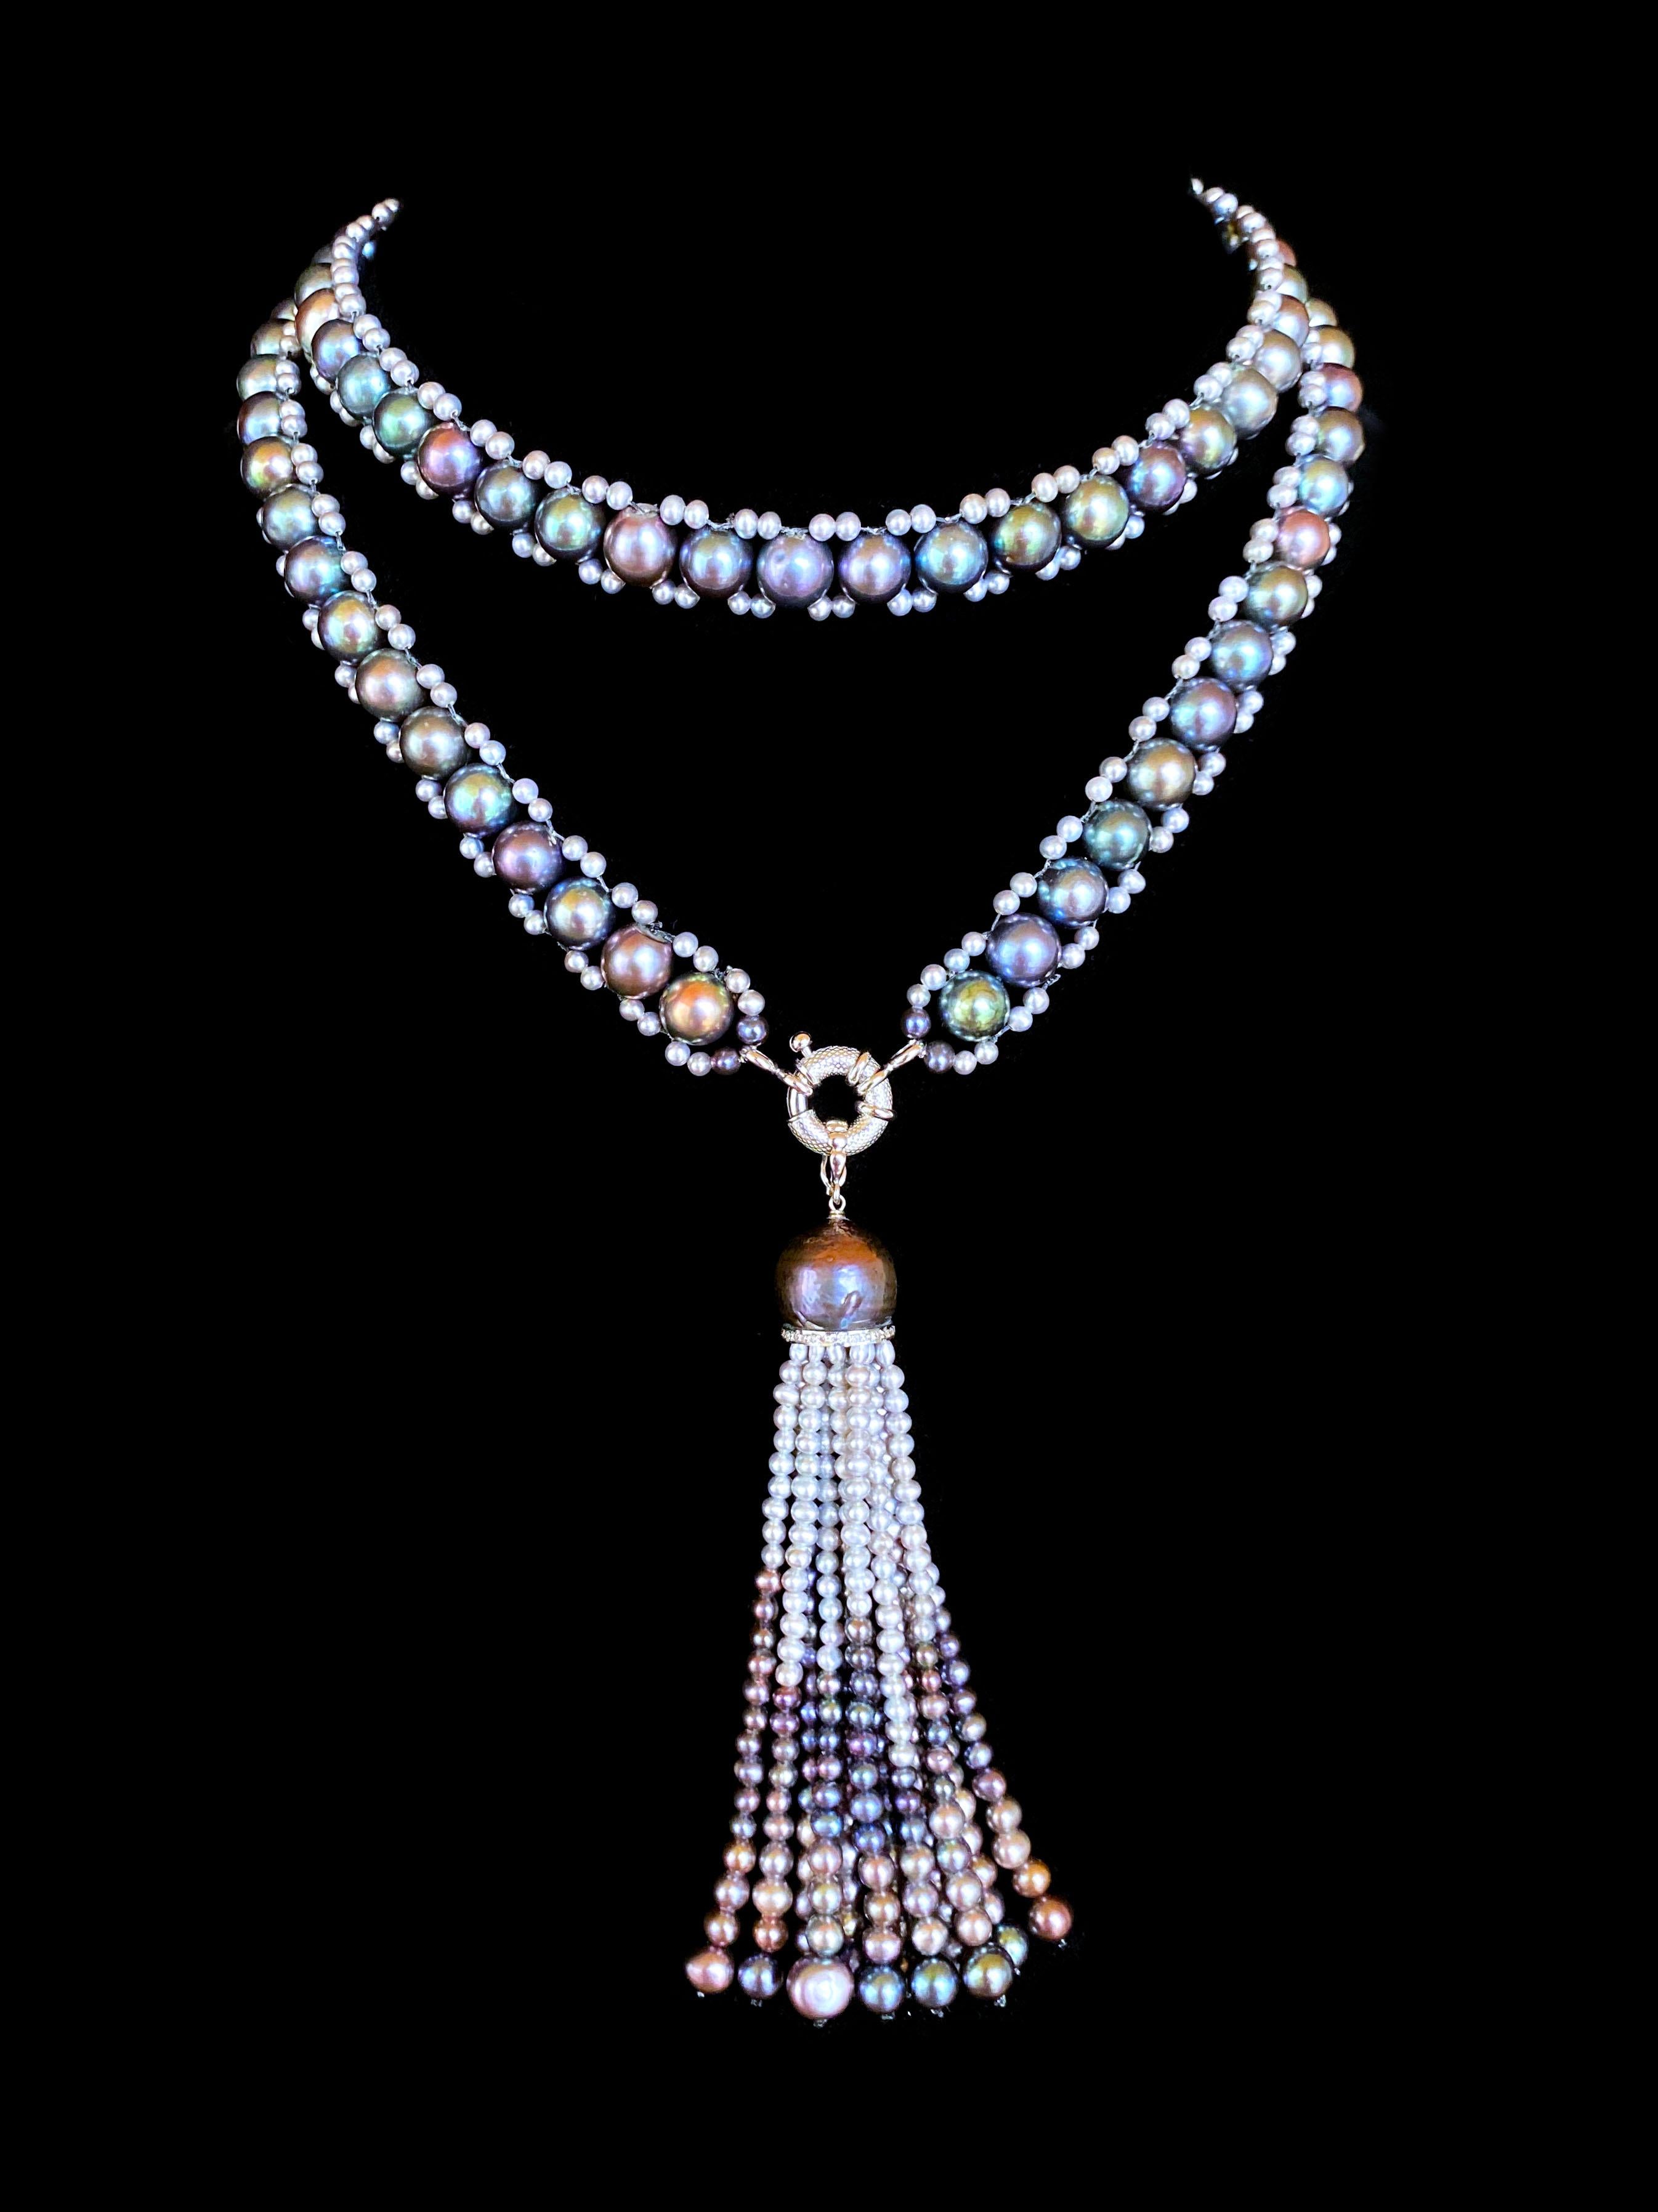 Marina J. Black & Grey Pearl Sautoir with Solid 14k White Gold Removable Tassel For Sale 3